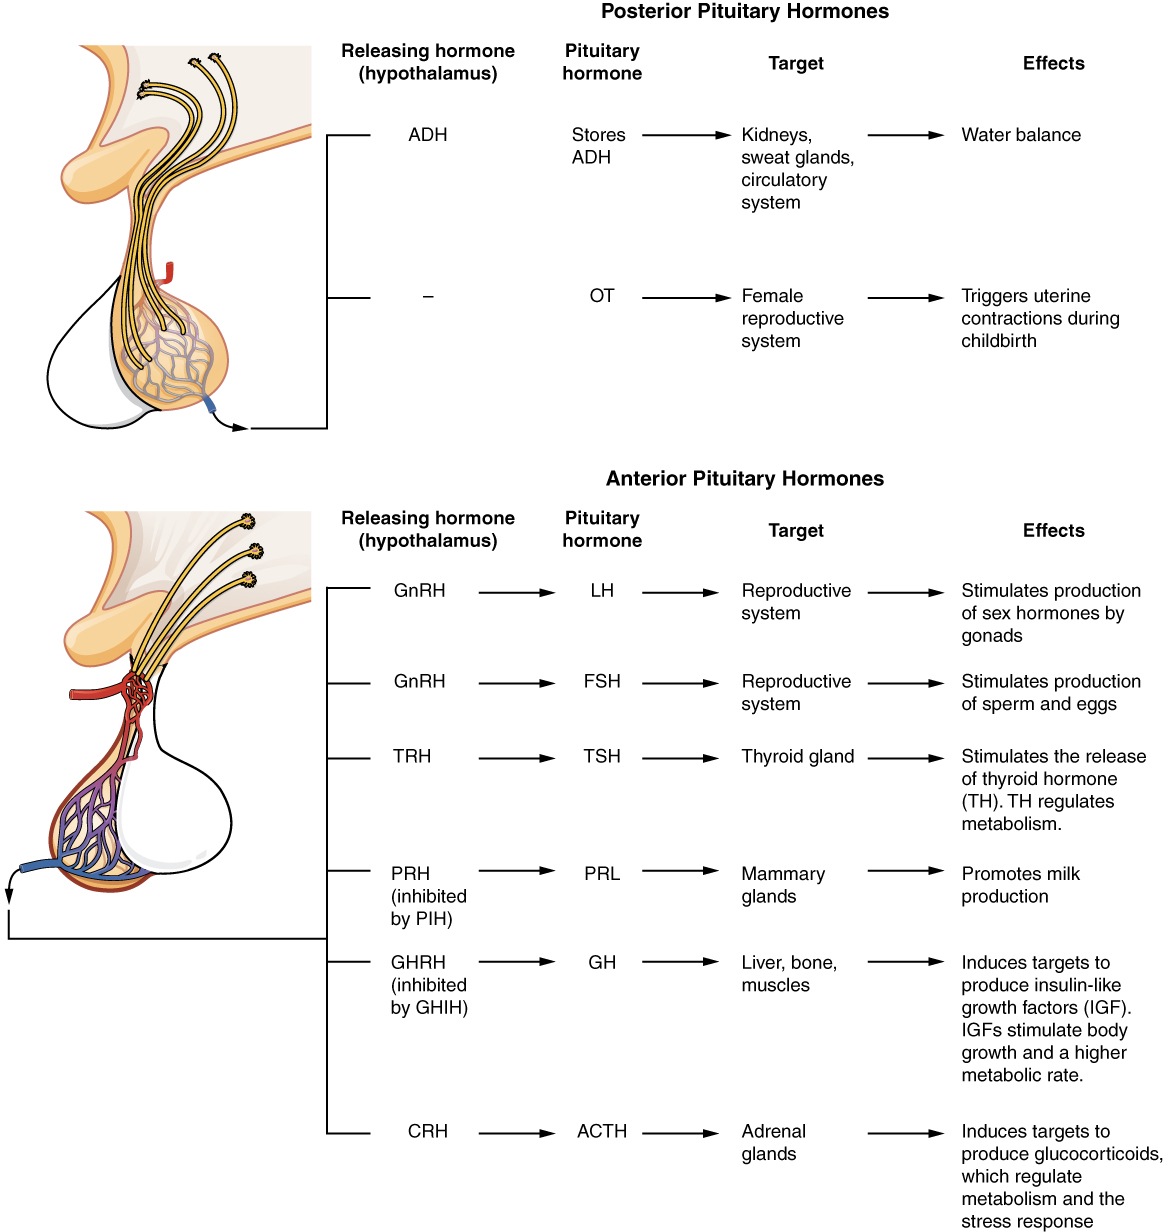 Summary of Hormones Secreted by the Pituitary Gland and their Effects